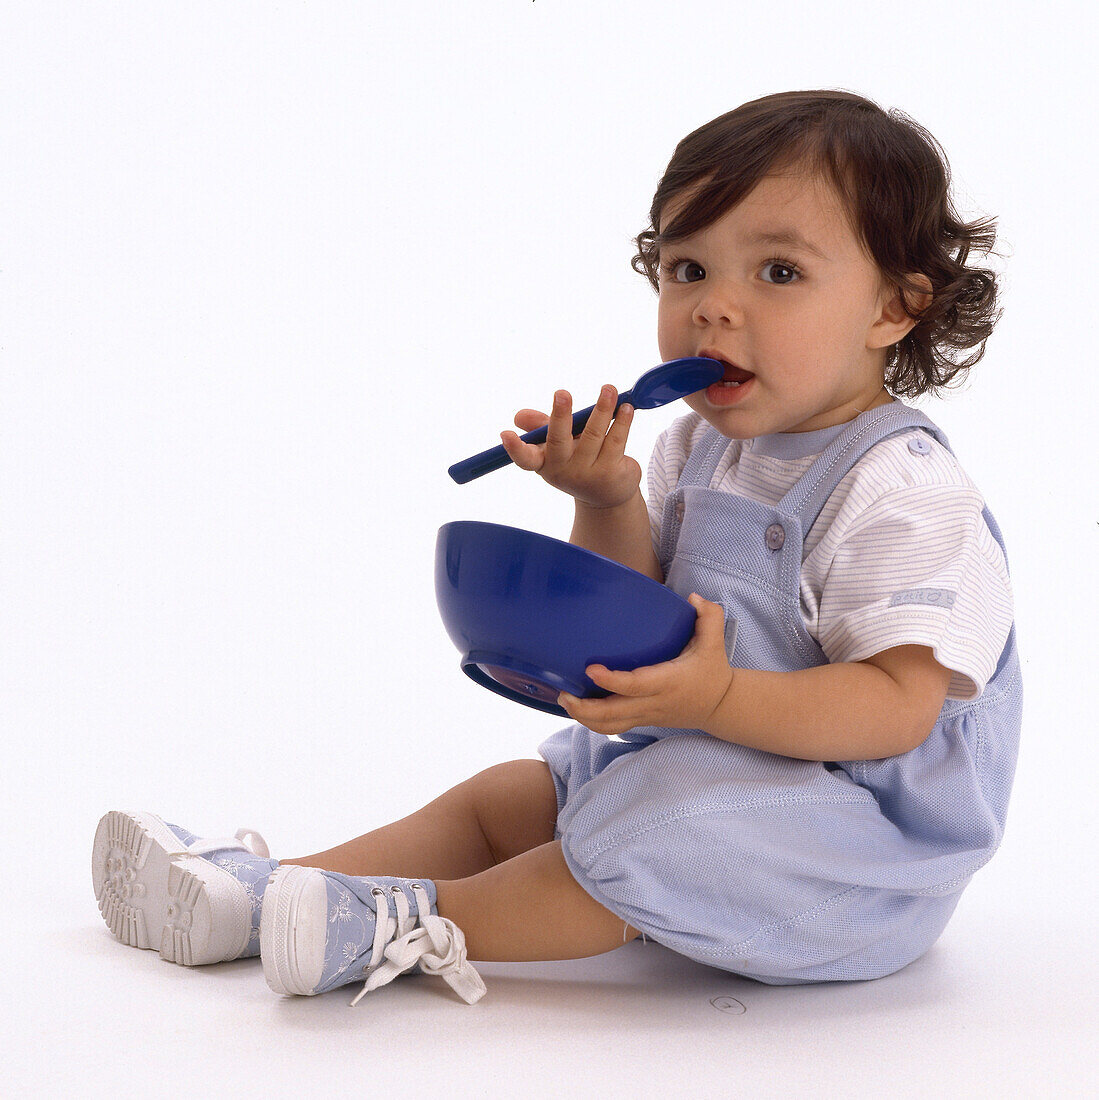 Little girl with bowl and spoon